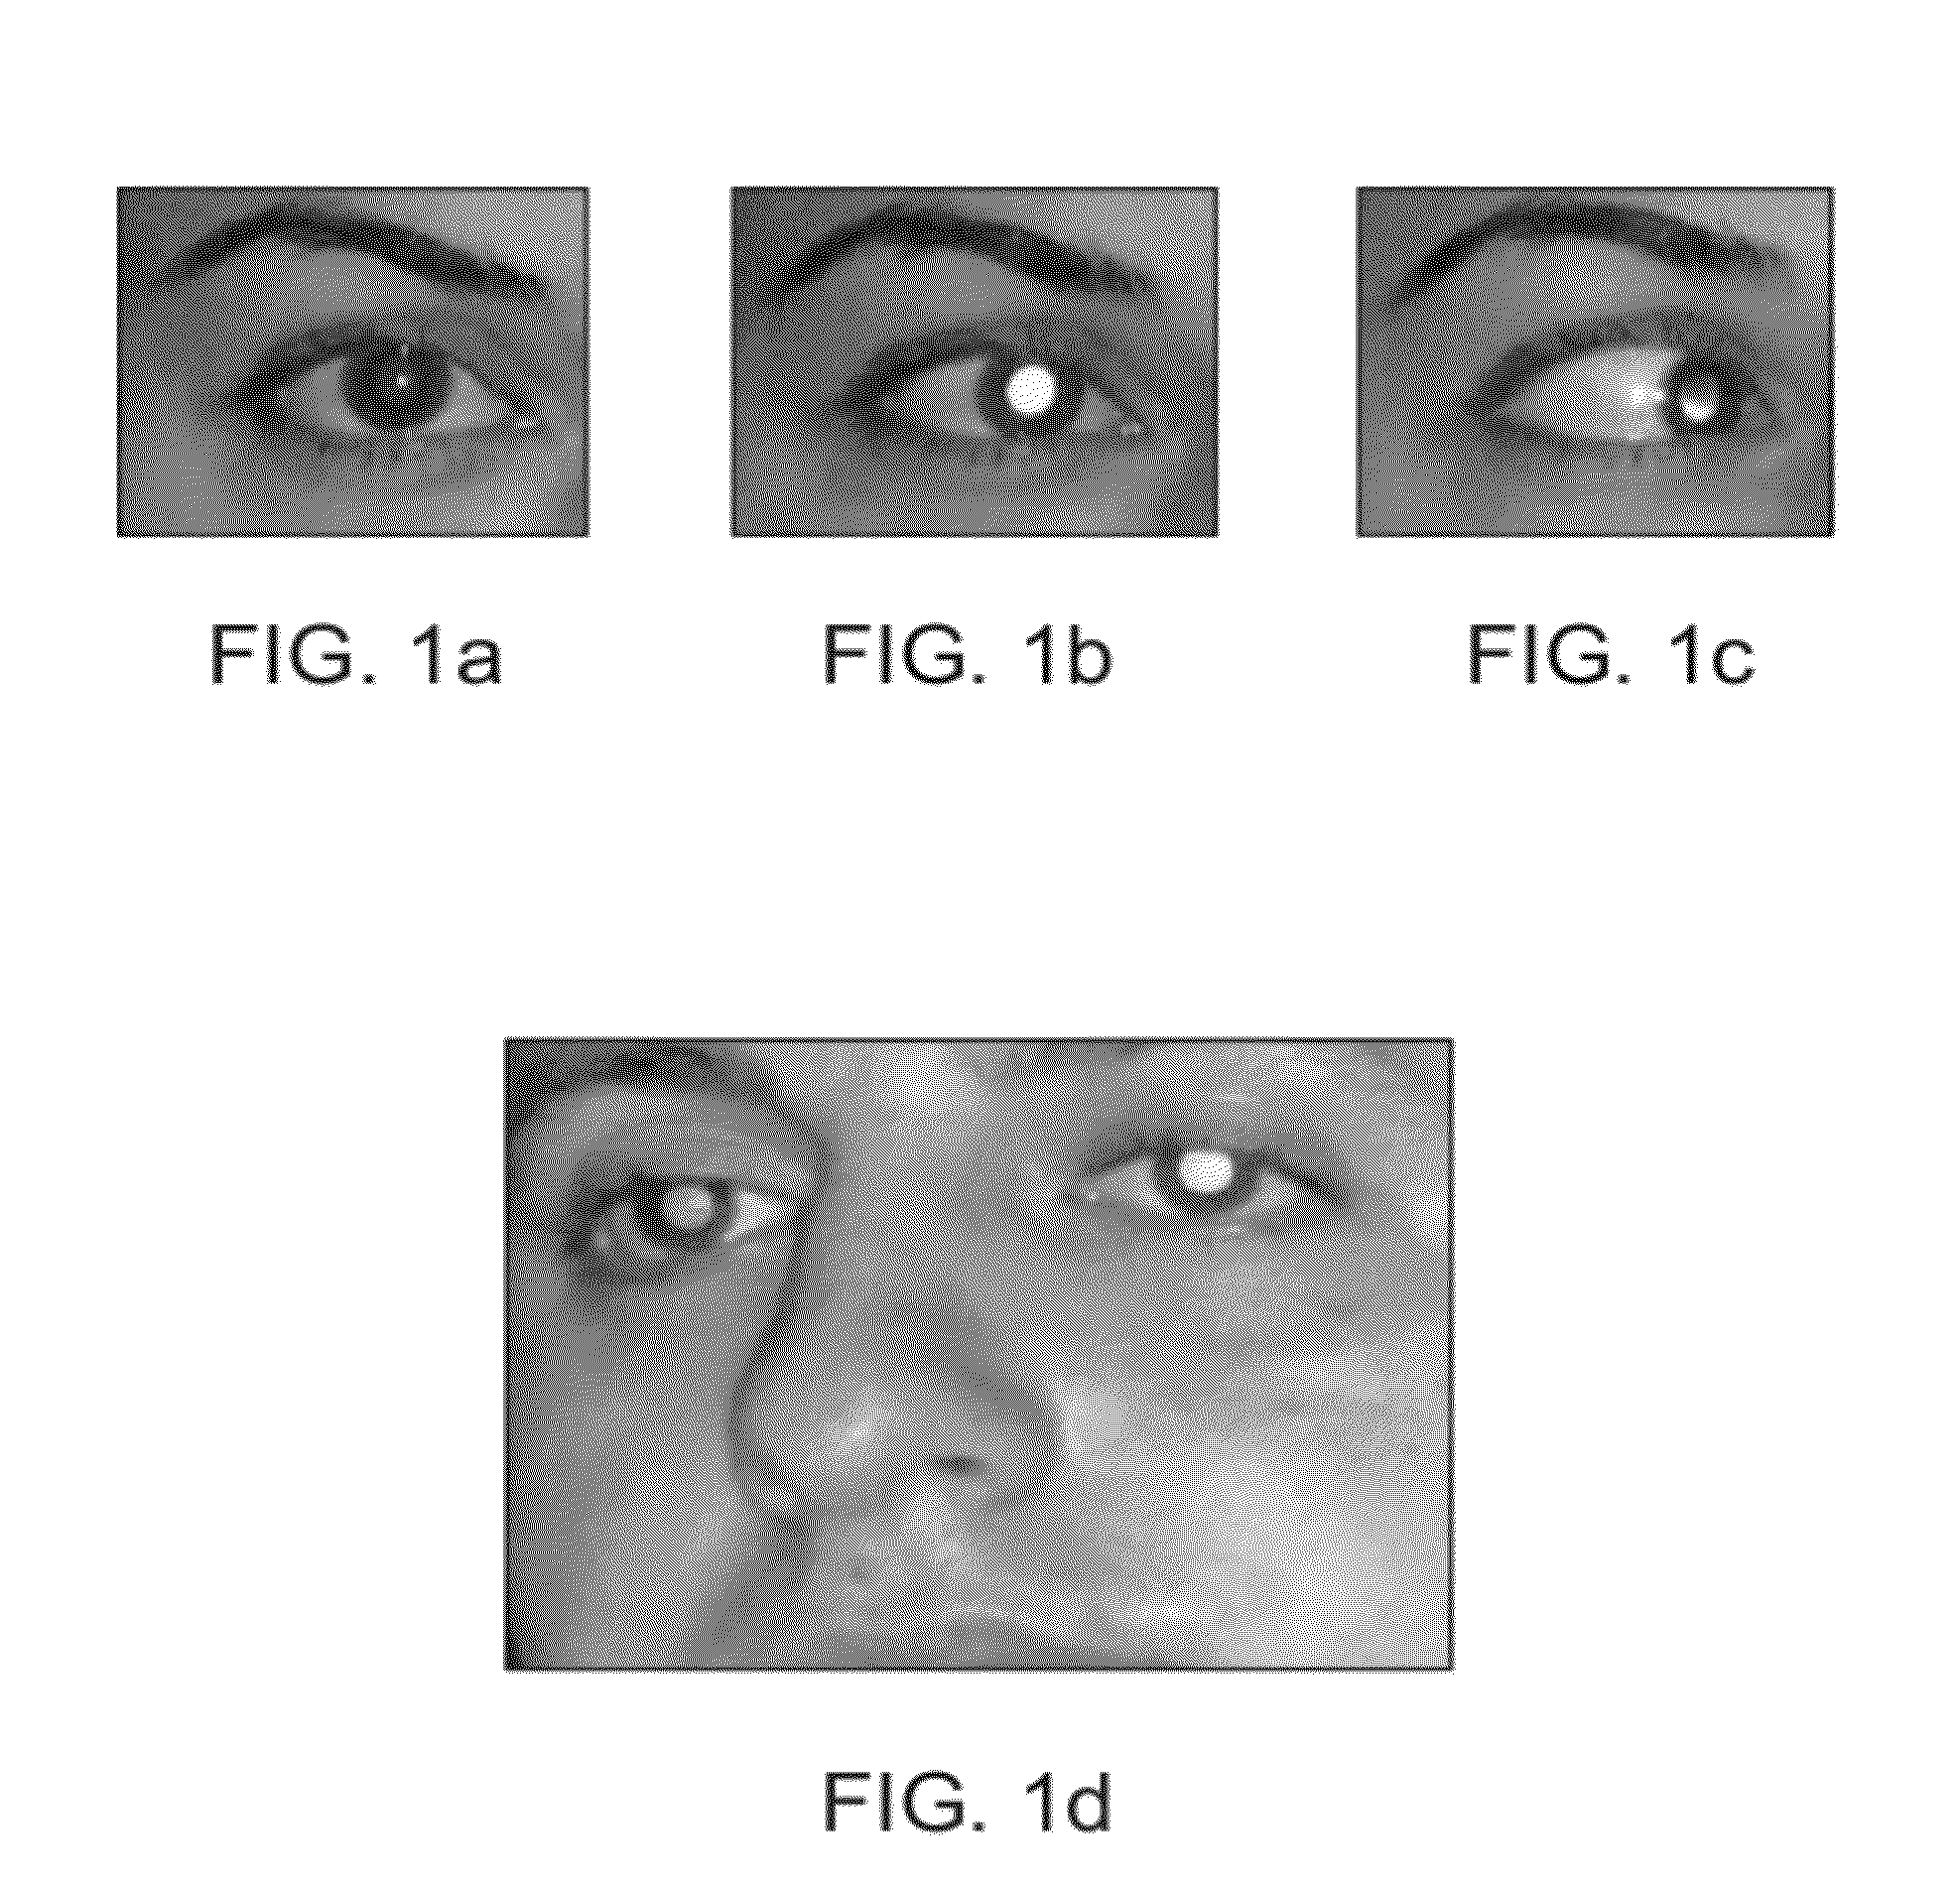 Methods and Apparatuses for Using Image Acquisition Data to Detect and Correct Image Defects